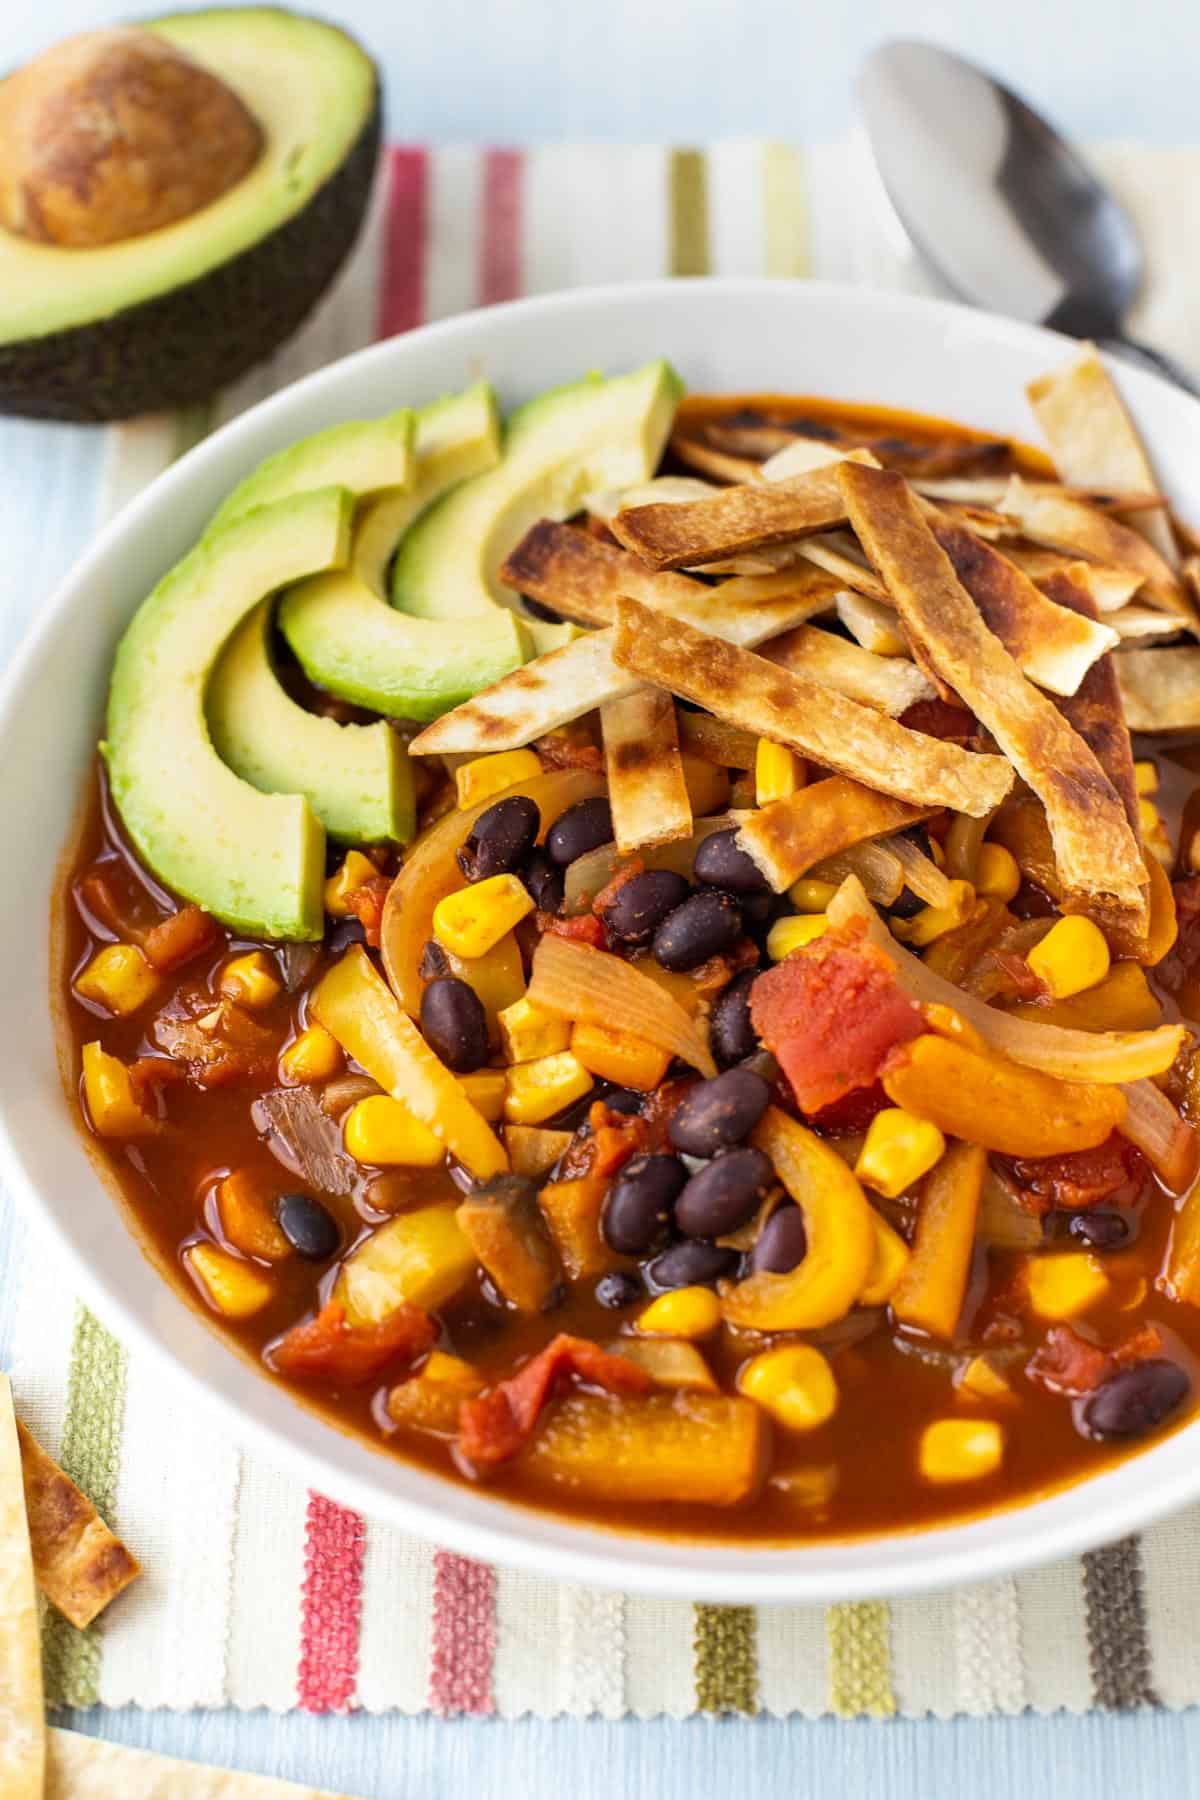 Vegan taco soup in a bowl topped with avocado and tortilla strips.